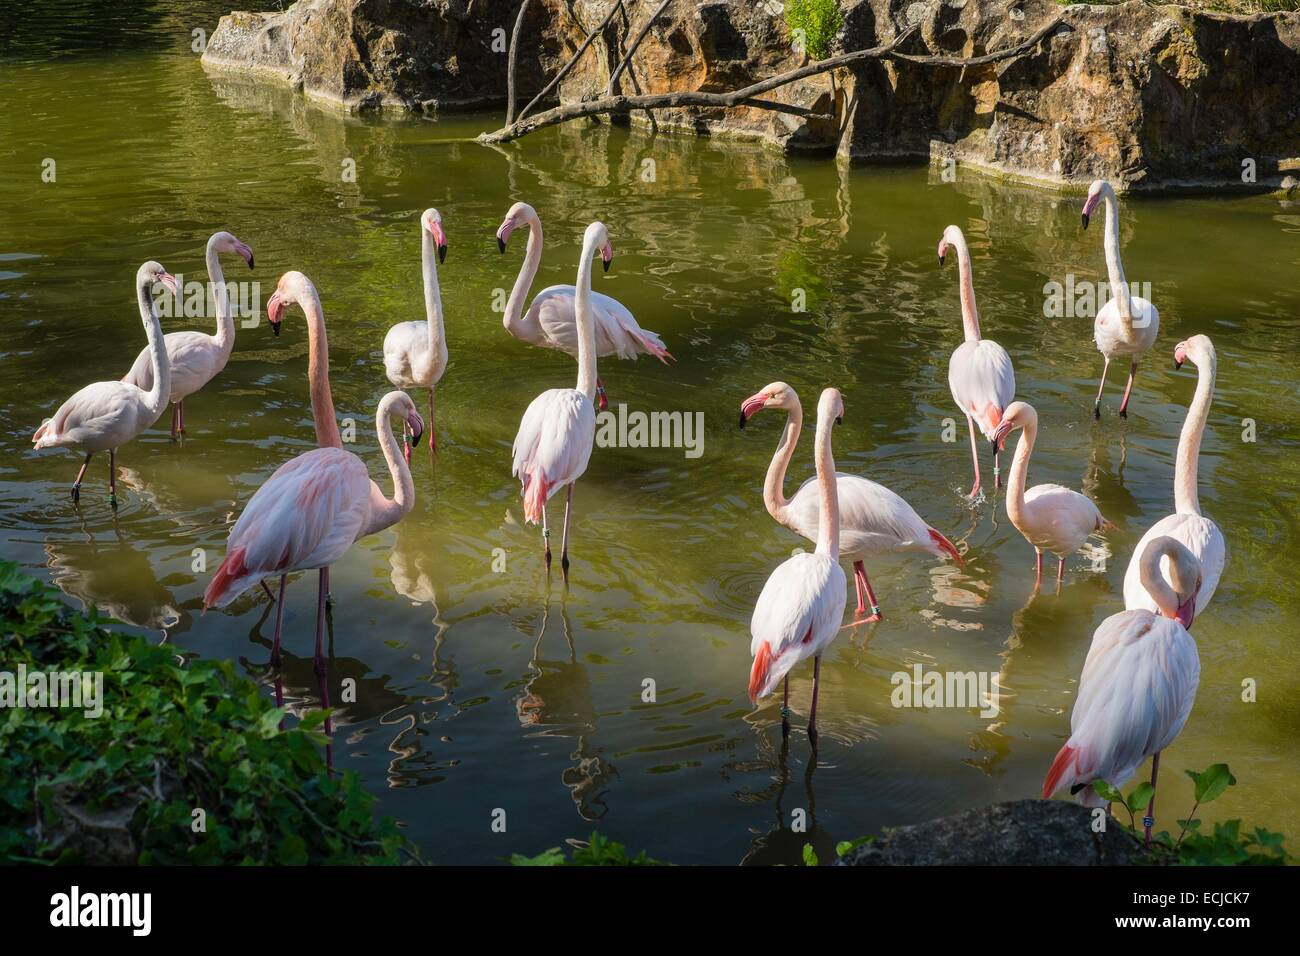 France, Rhone, Lyon, Parc de la Tete d'Or or Park of the Golden Head, Lyon Zoo is a free zoo, fully renovated in 2006, housing on 10 acres around 400 animals, Greater Flamingo (Phoenicopterus roseus) Stock Photo